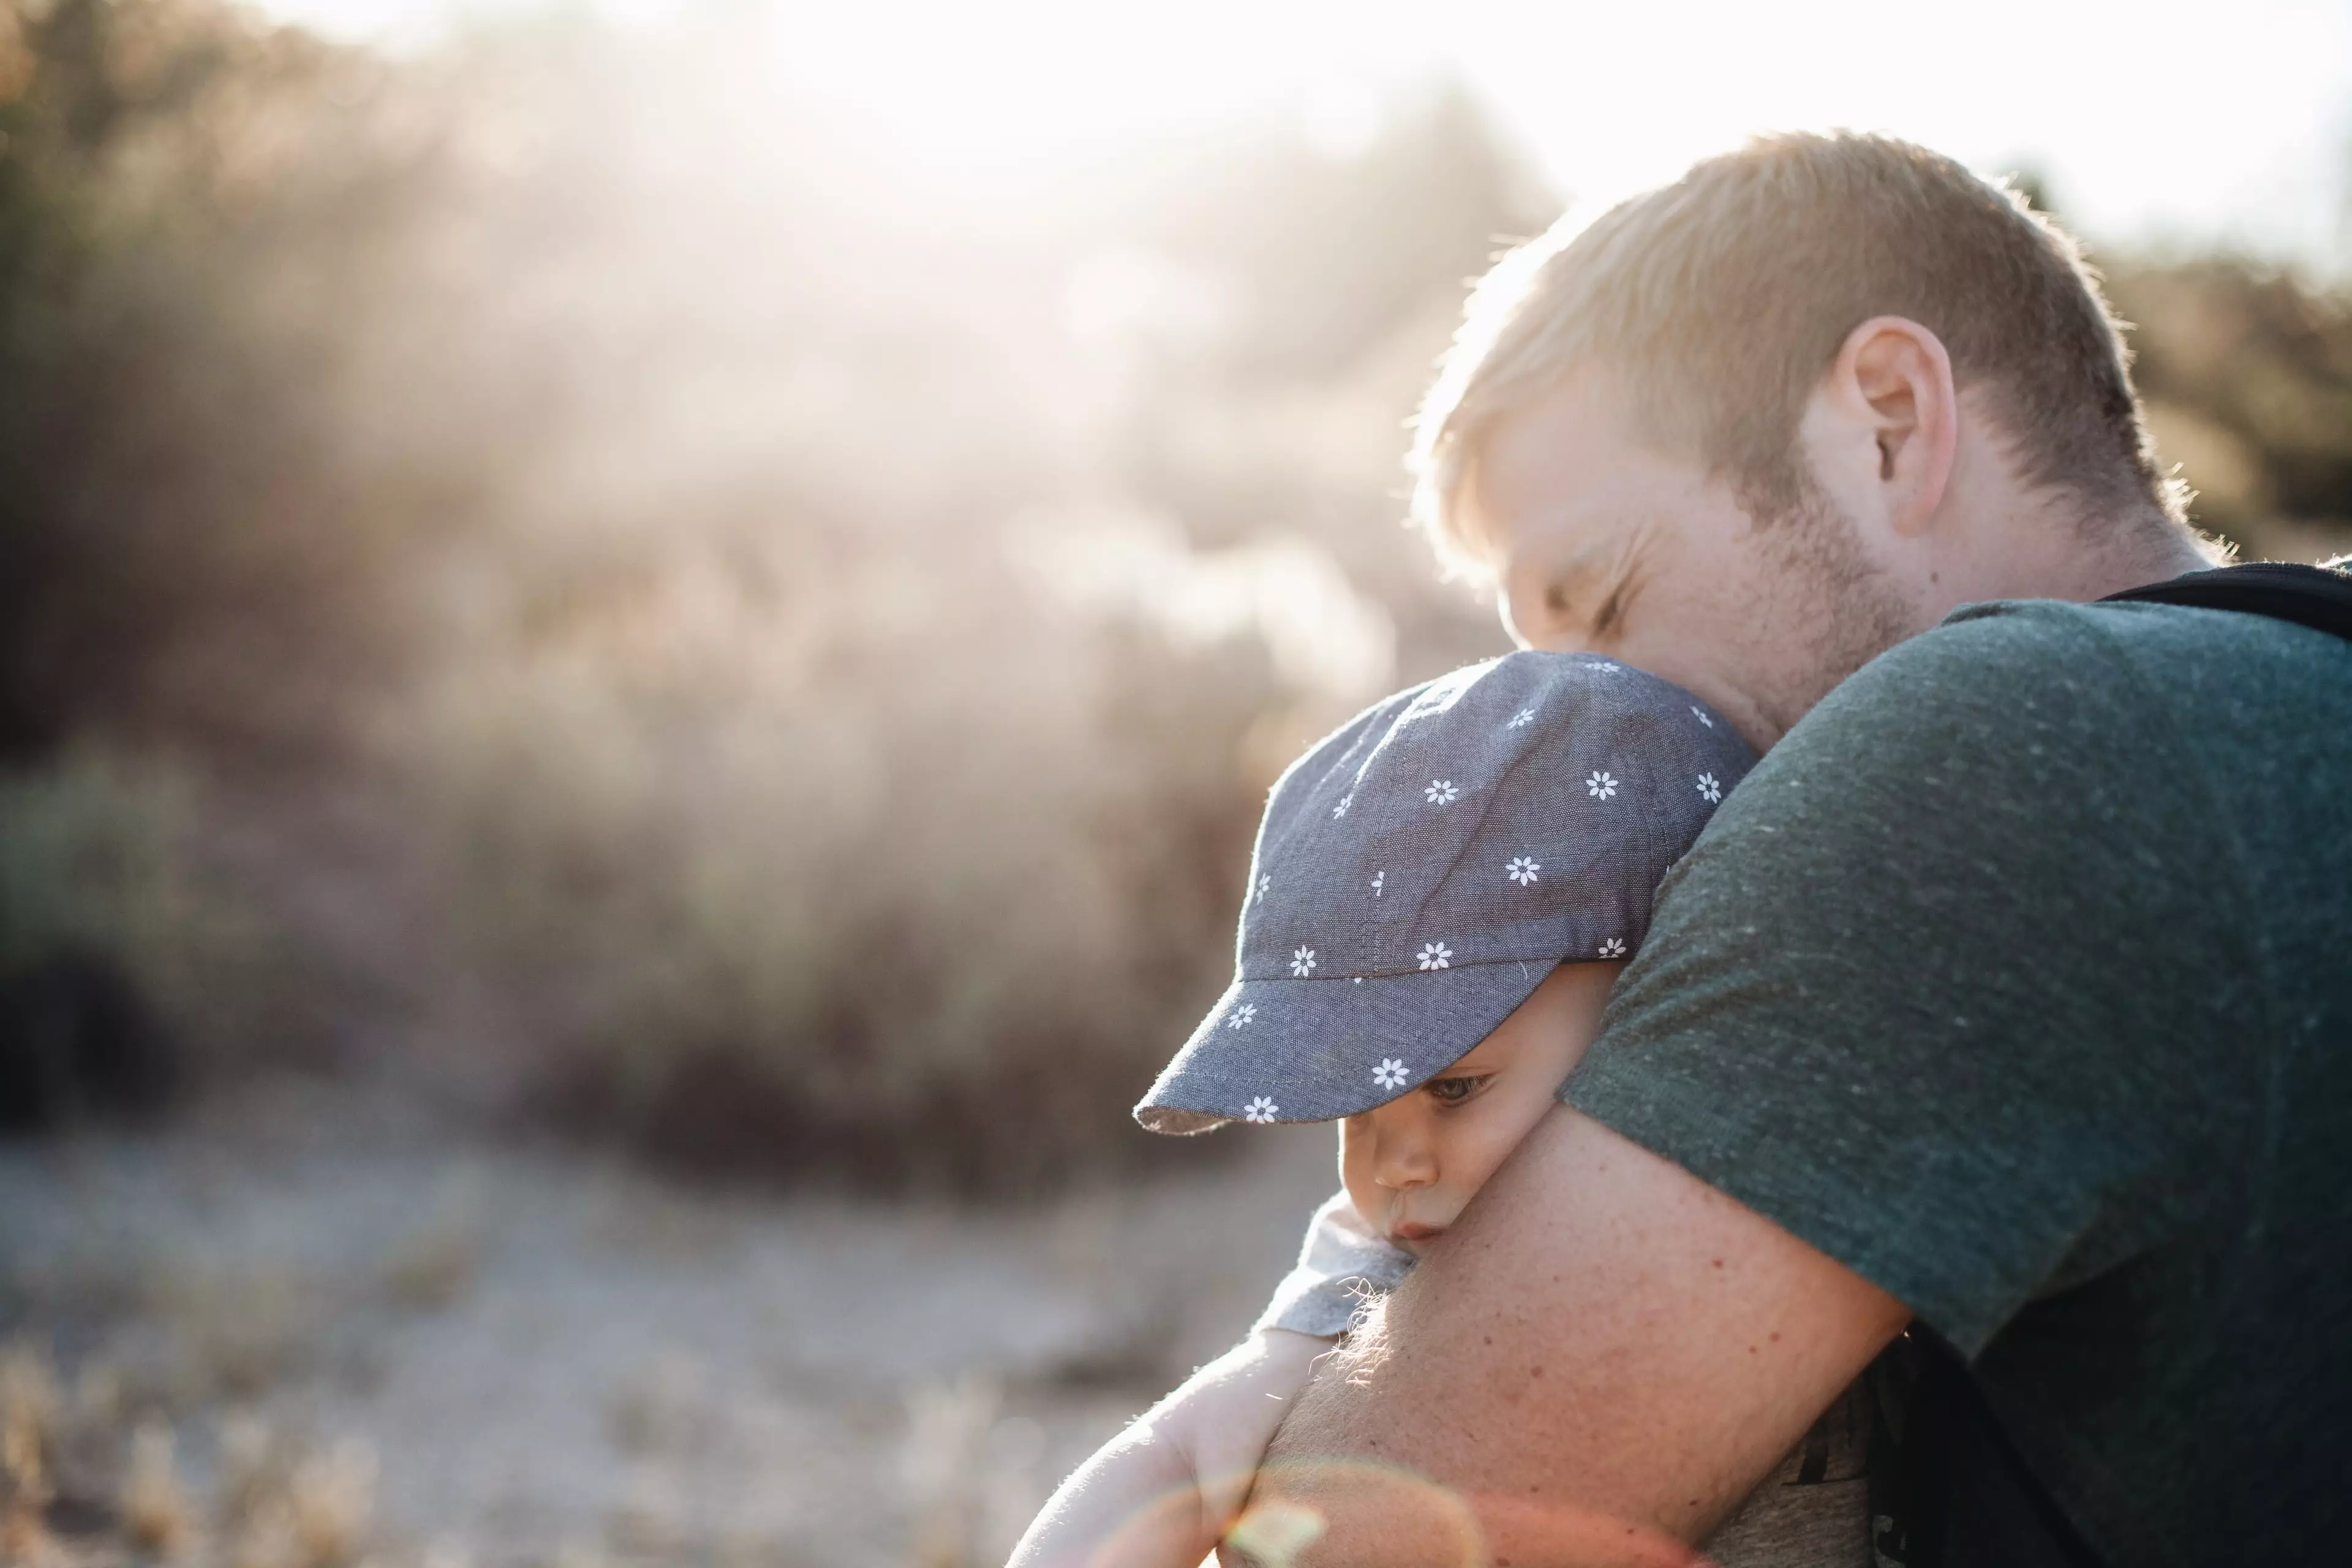 The NHS will offer more complimentary mental health checks for new and expectant dads. (